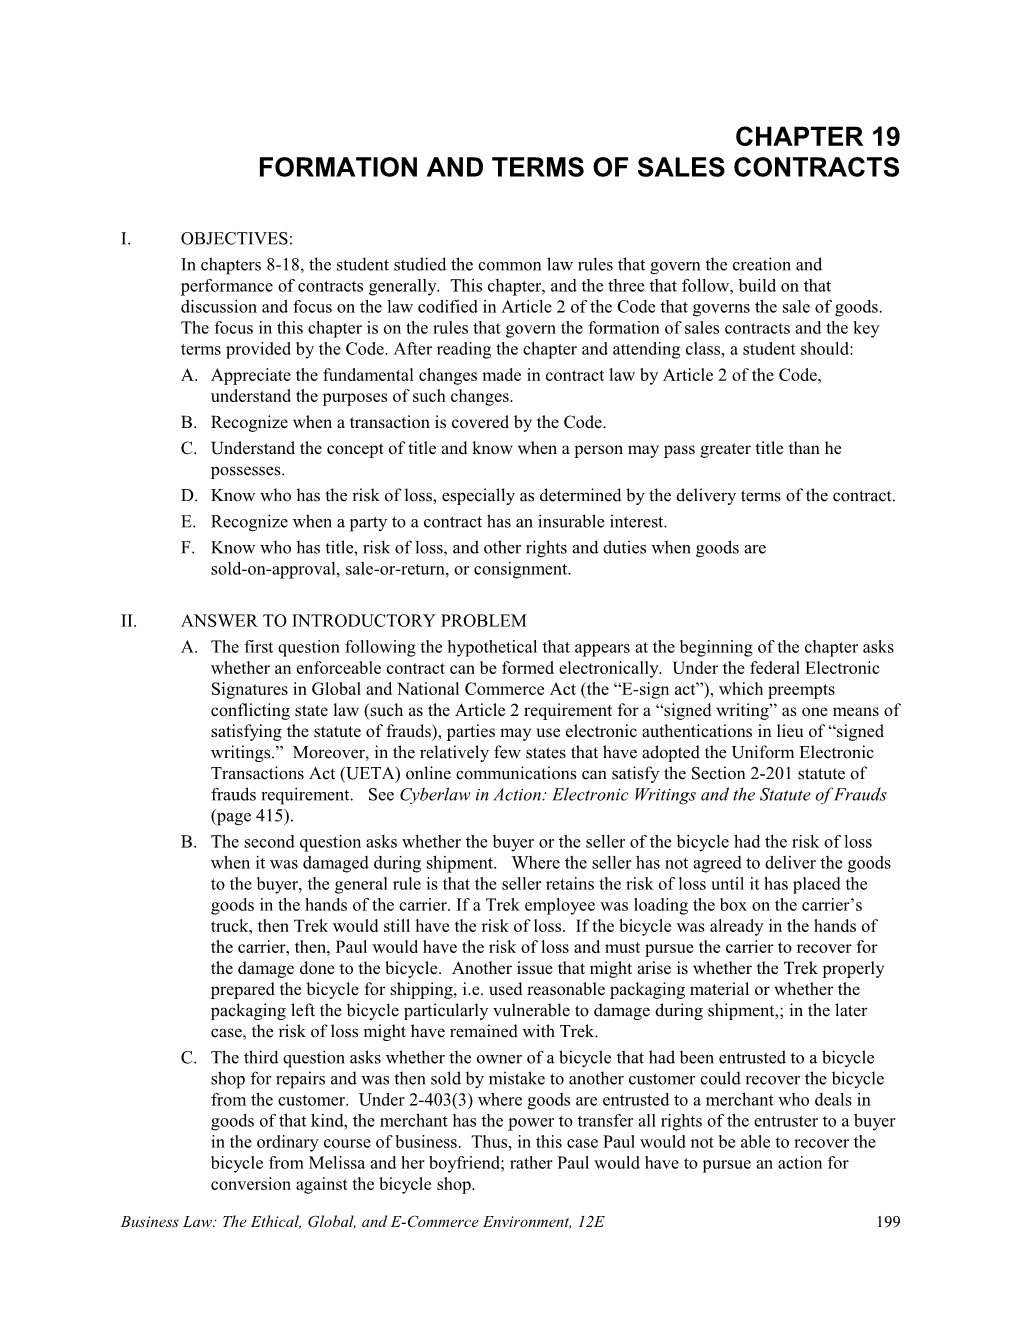 Chapter 19: Formation and Terms of Sales Contracts